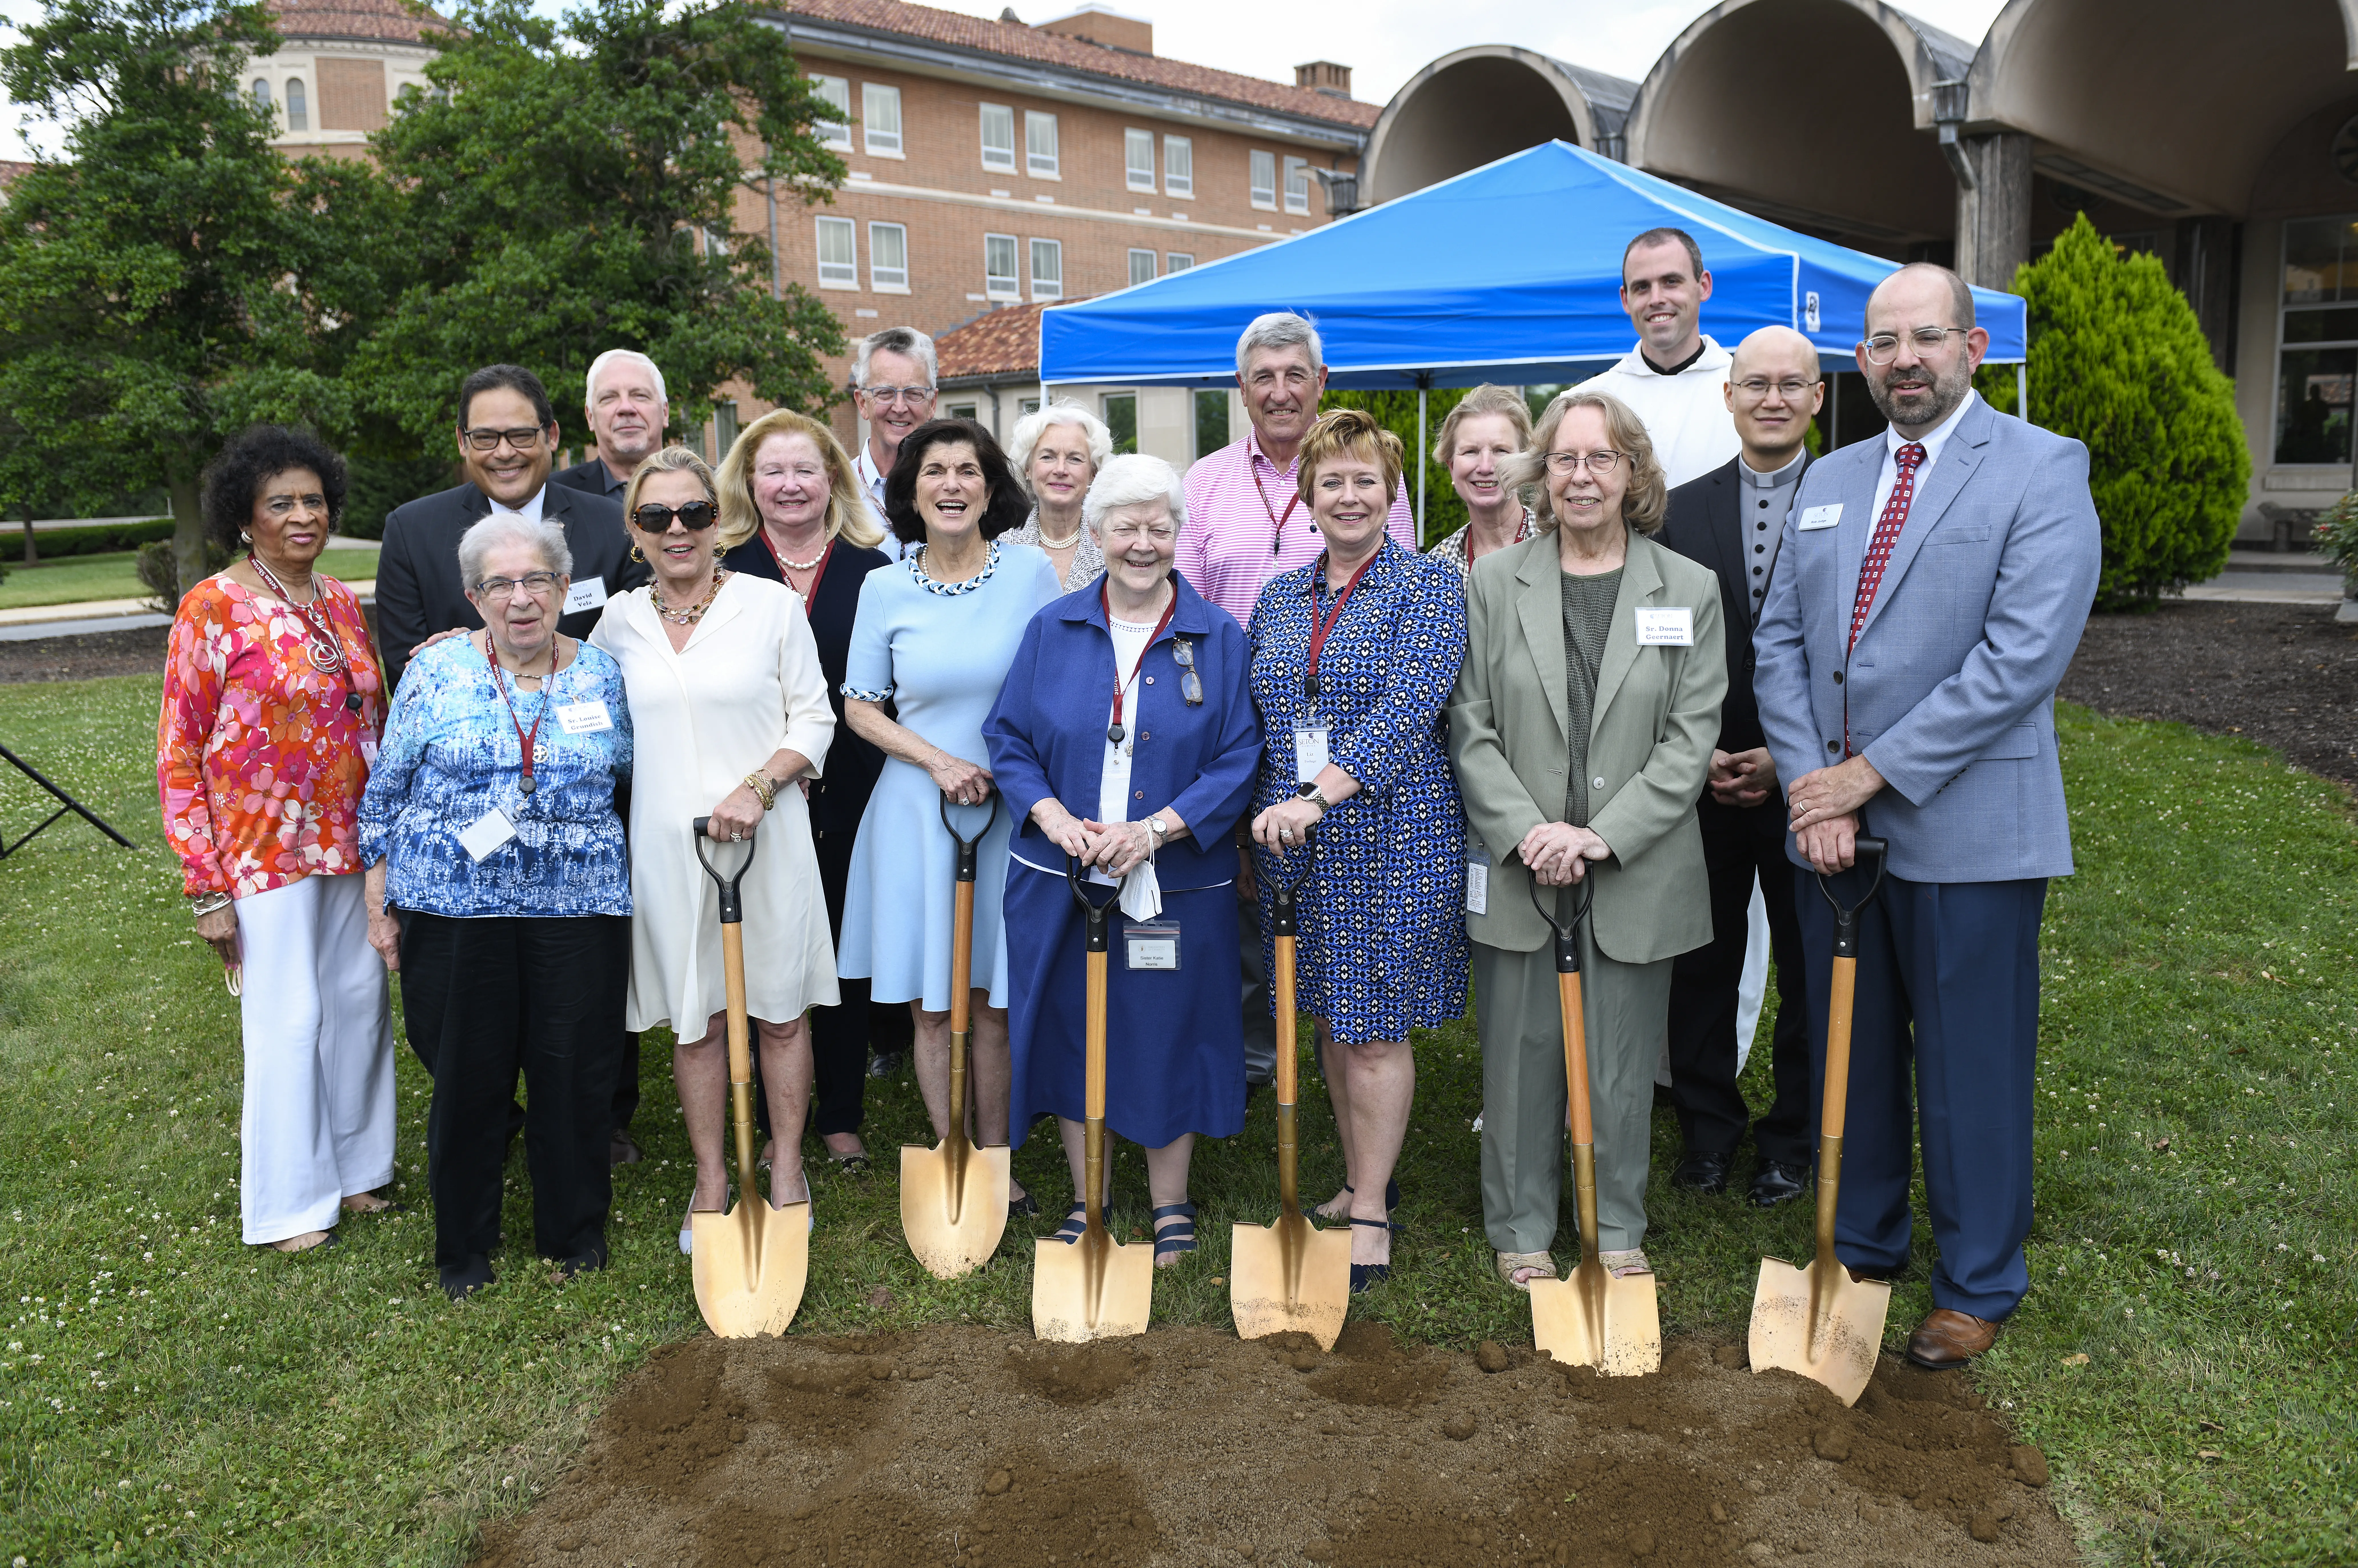 The groundbreaking ceremony for the renovation of the museum and visitor center at the National Shrine of Saint Elizabeth Ann Seton in Emmitsburg, Md., June 24, 2022.?w=200&h=150